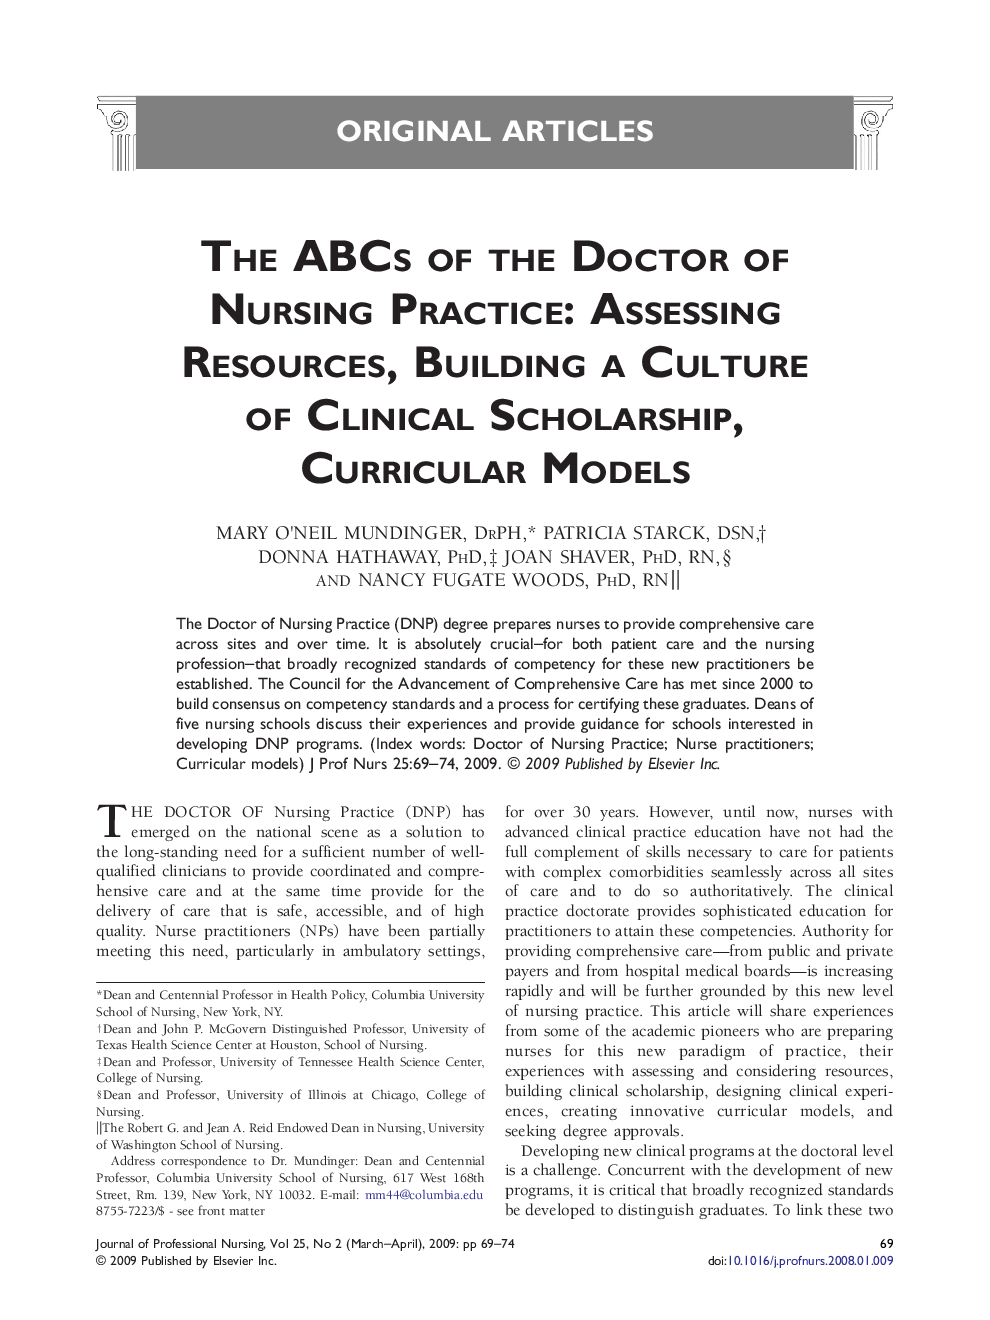 The ABCs of the Doctor of Nursing Practice: Assessing Resources, Building a Culture of Clinical Scholarship, Curricular Models